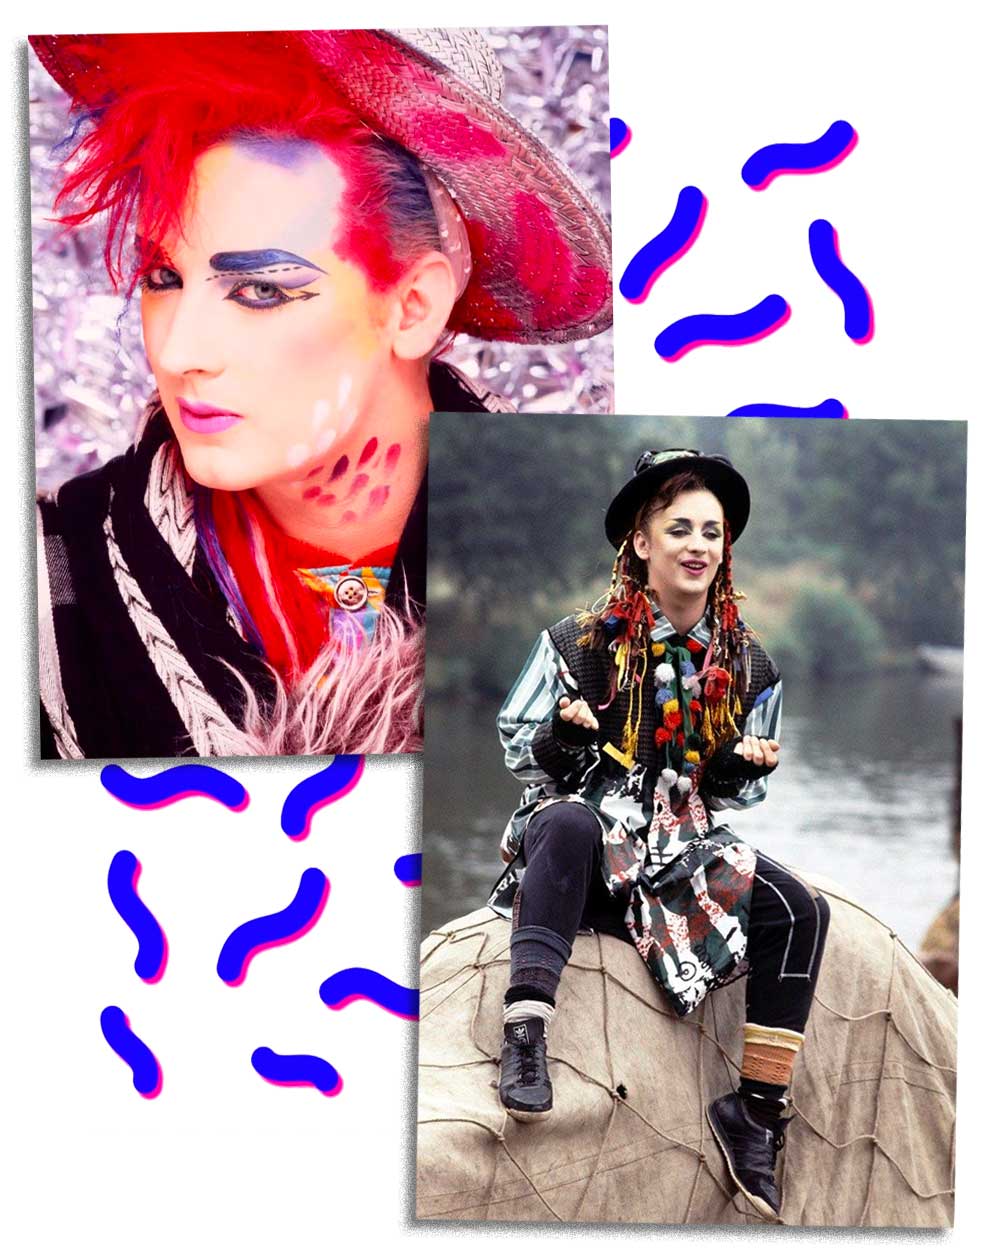 Boy George Influence on the 80s Fashion